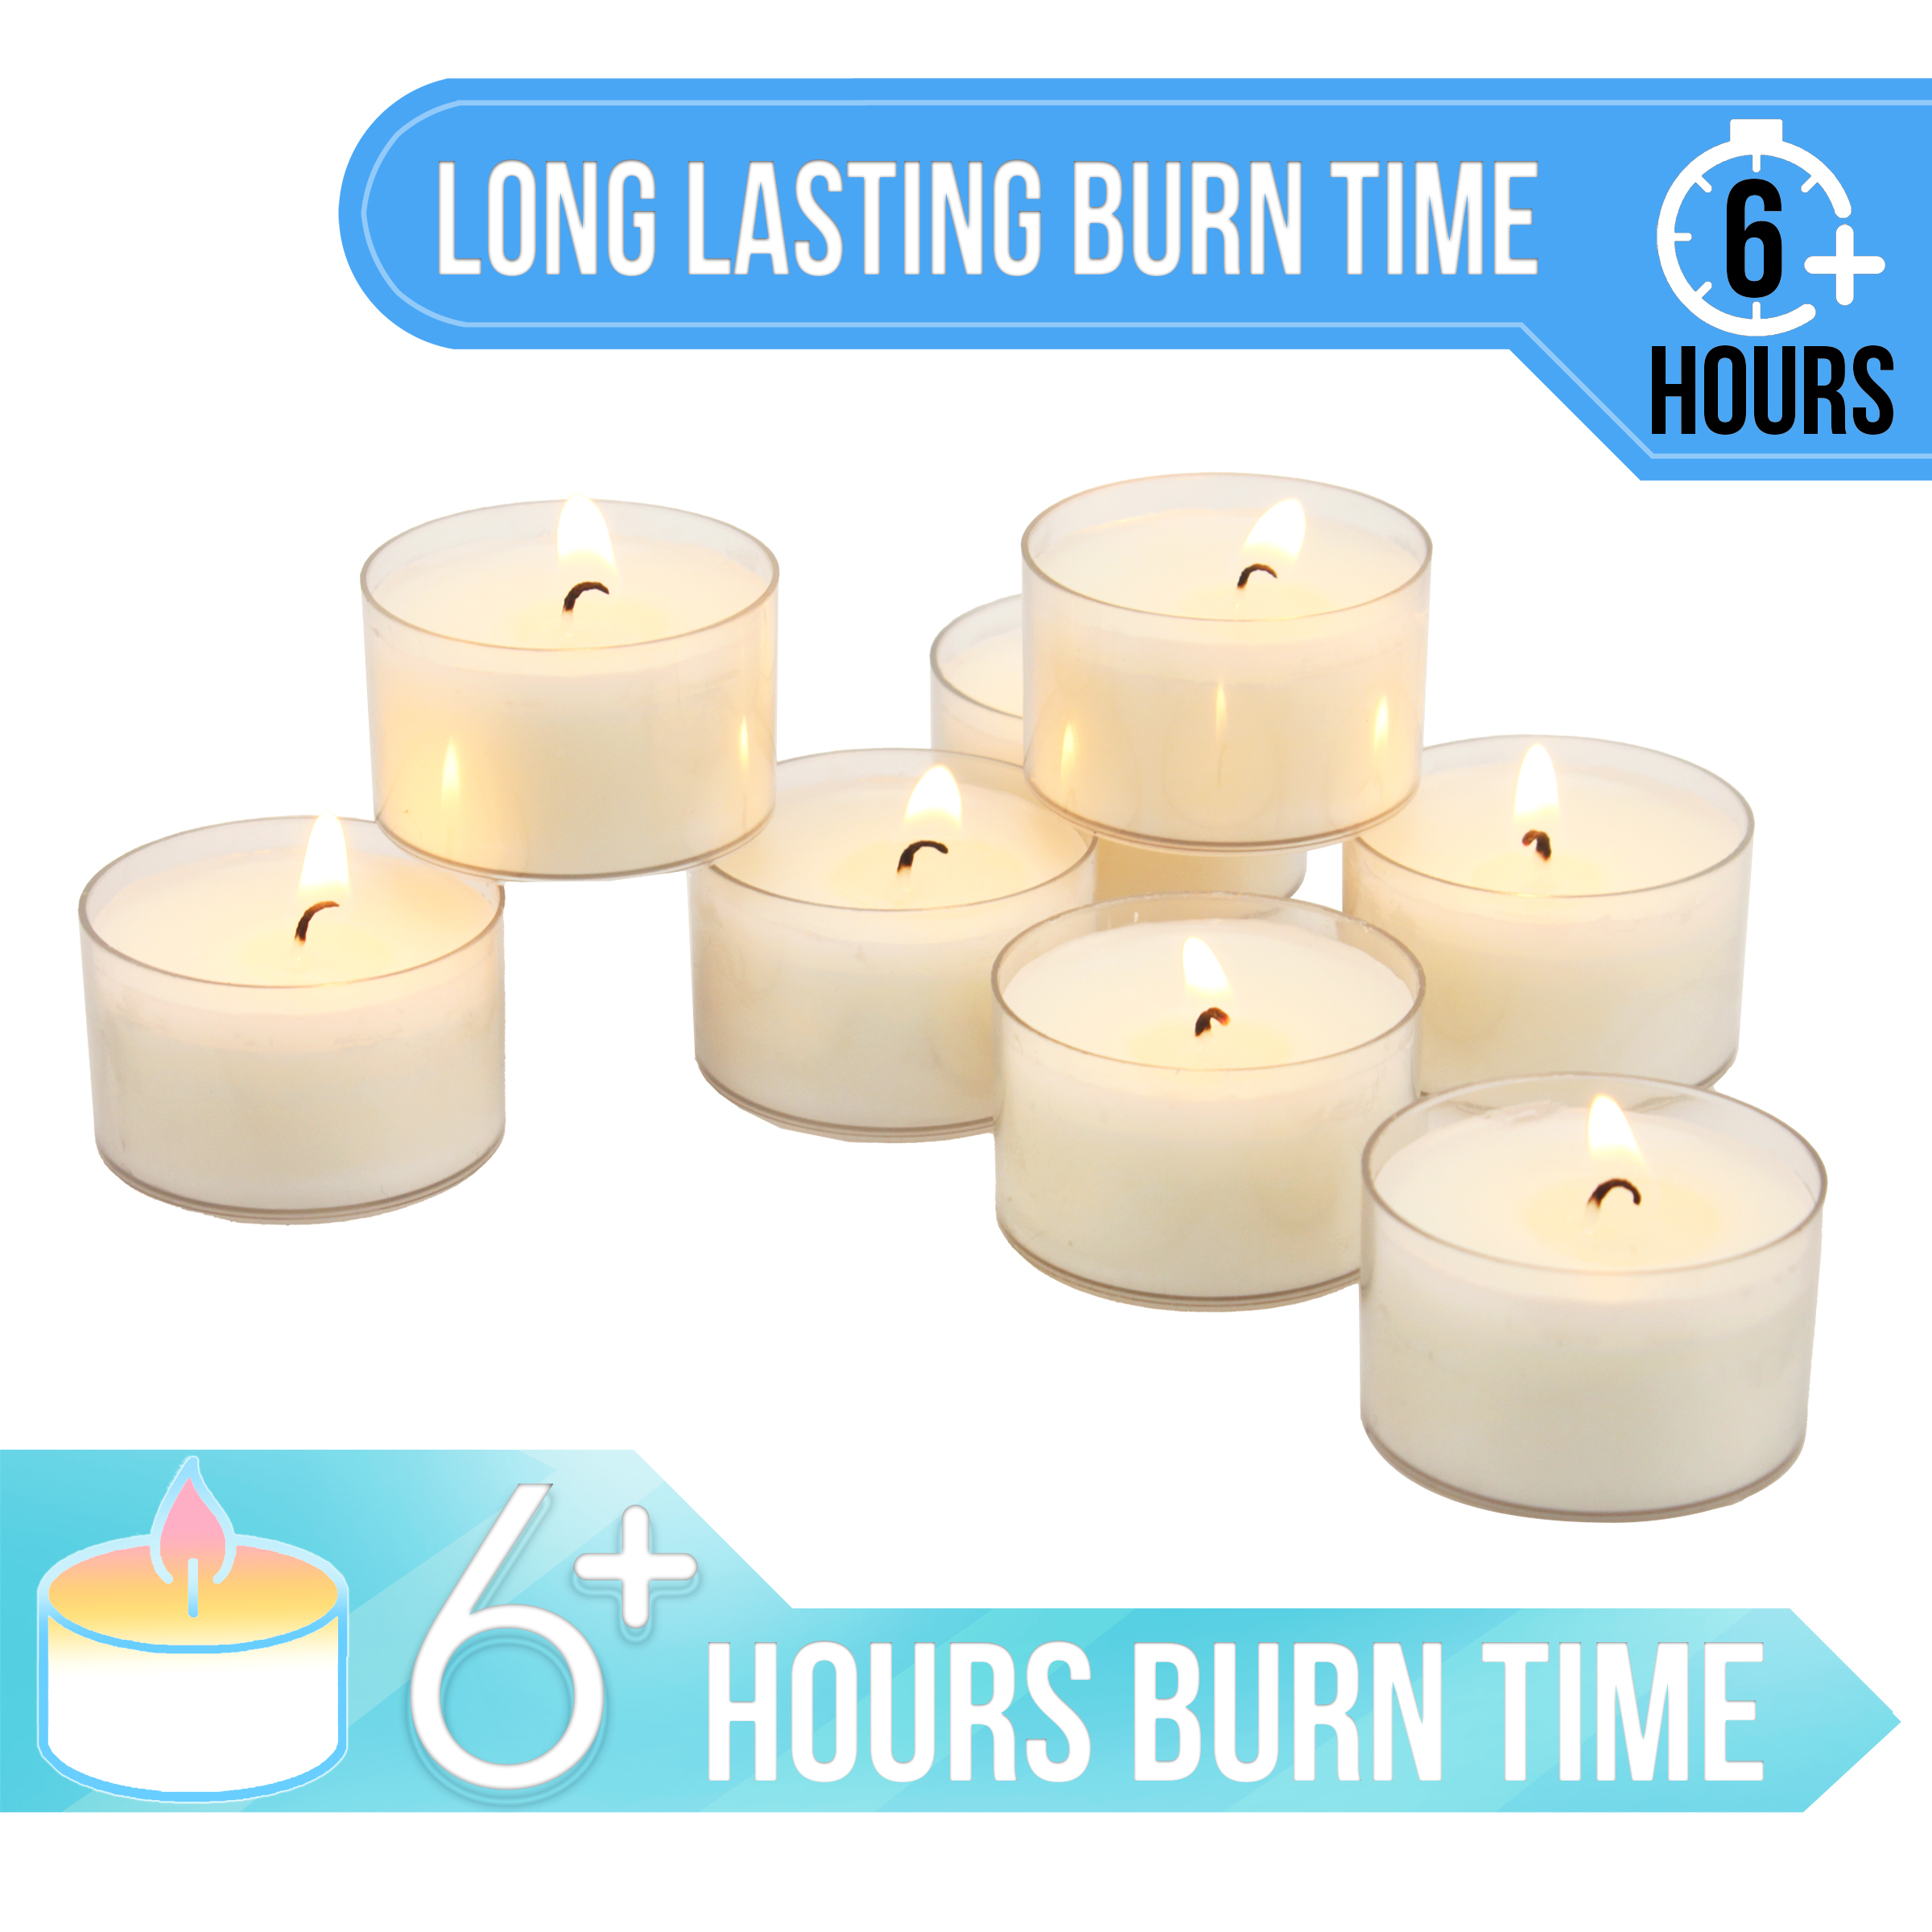 Stonebriar Unscented Long Burning Clear Cup Tealight Candles with 6-7 Hour Burn Time, 96 Pack, White - image 5 of 8